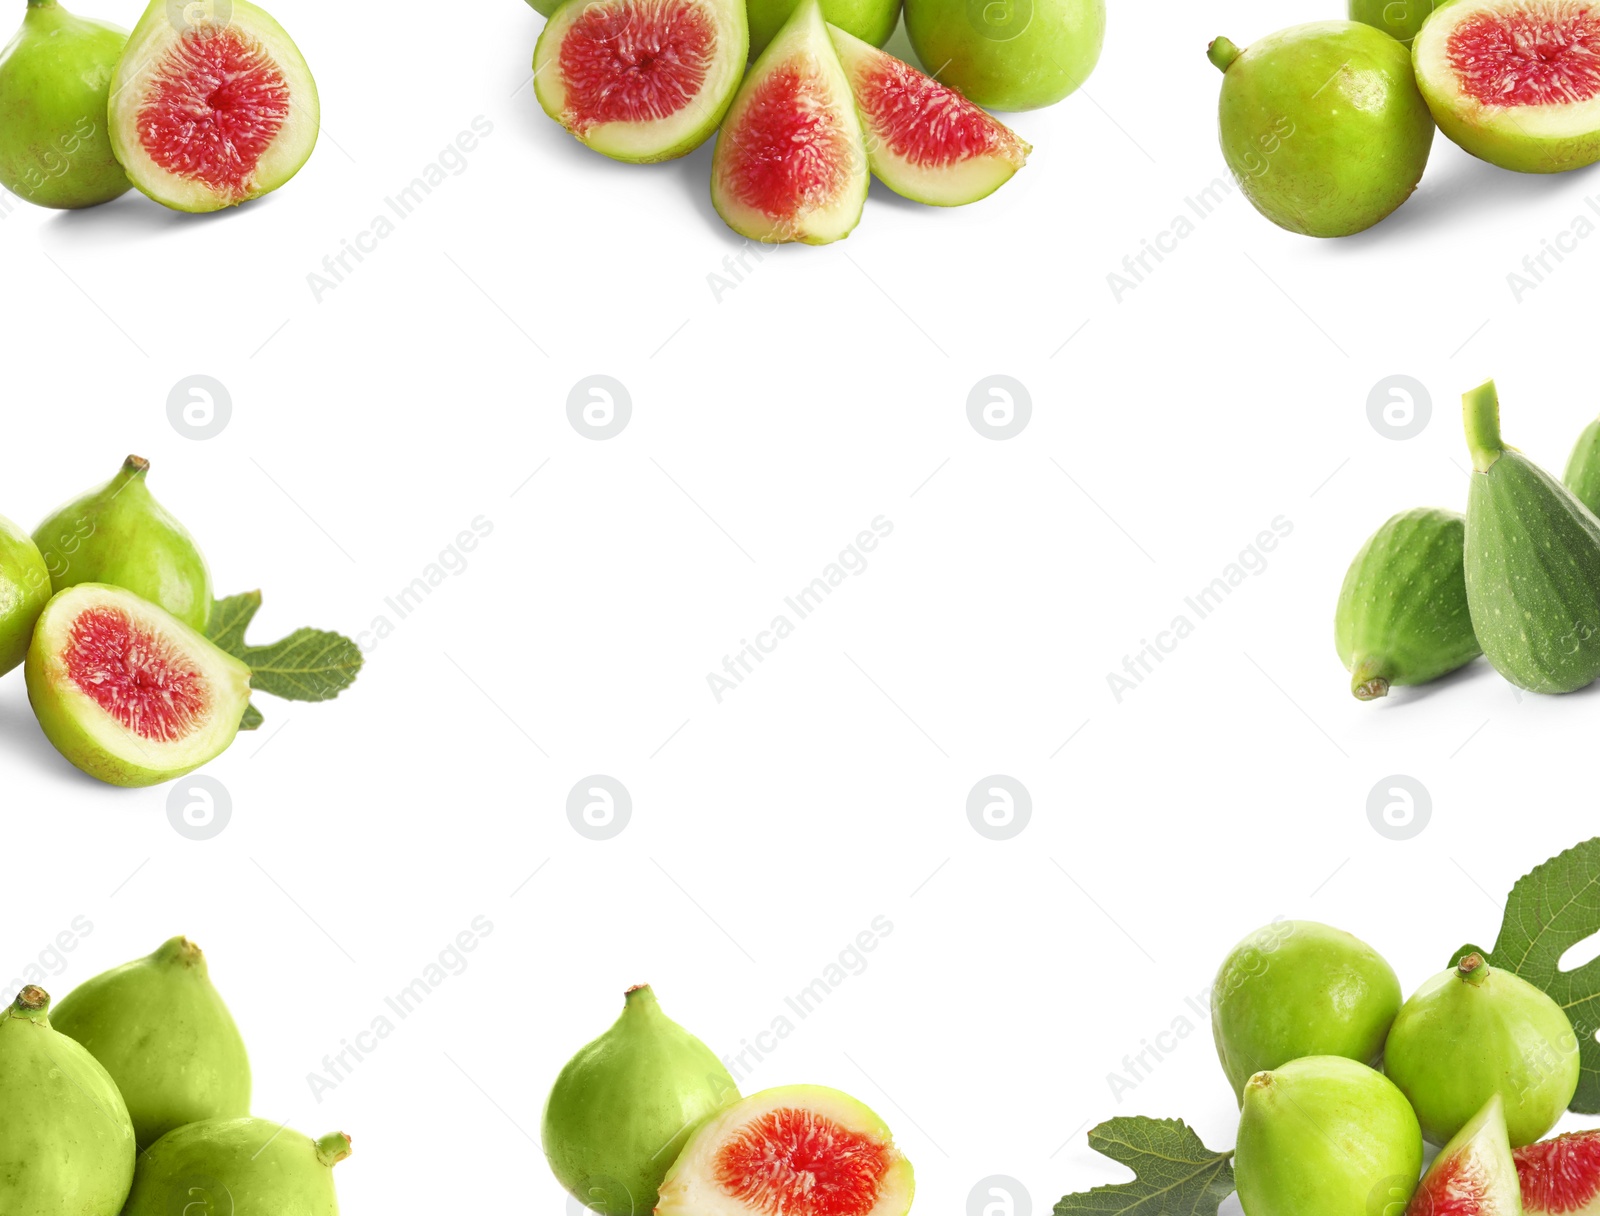 Image of Frame of ripe green figs on white background